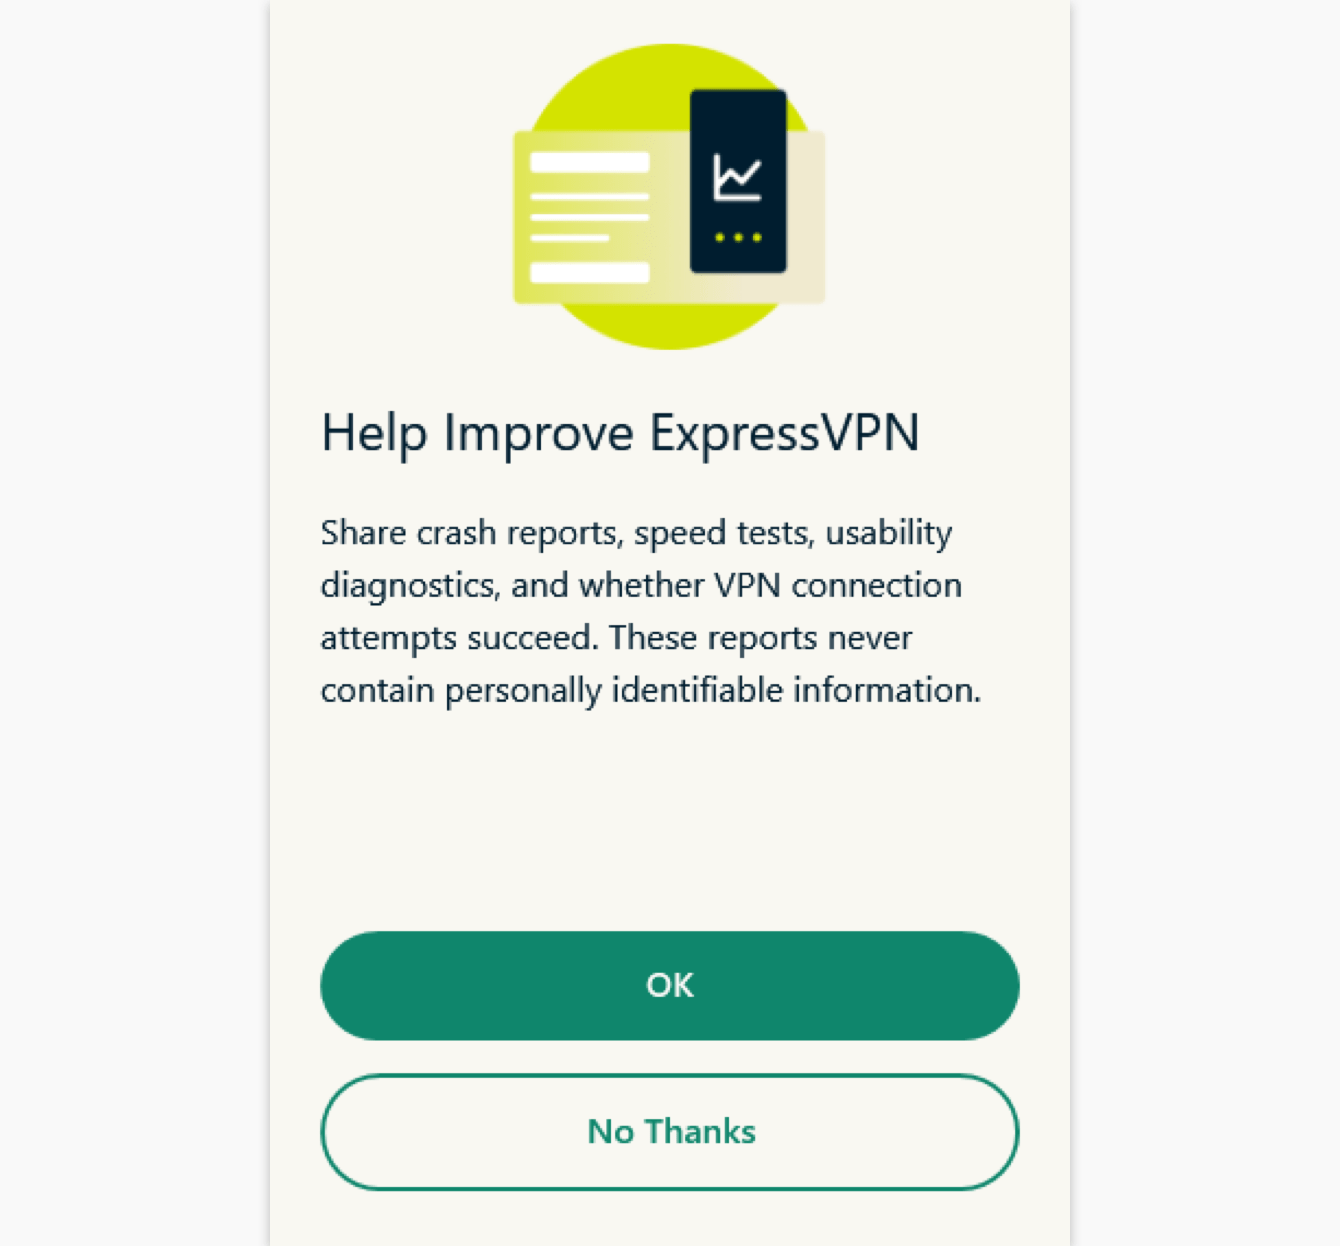 How to Install Express VPN